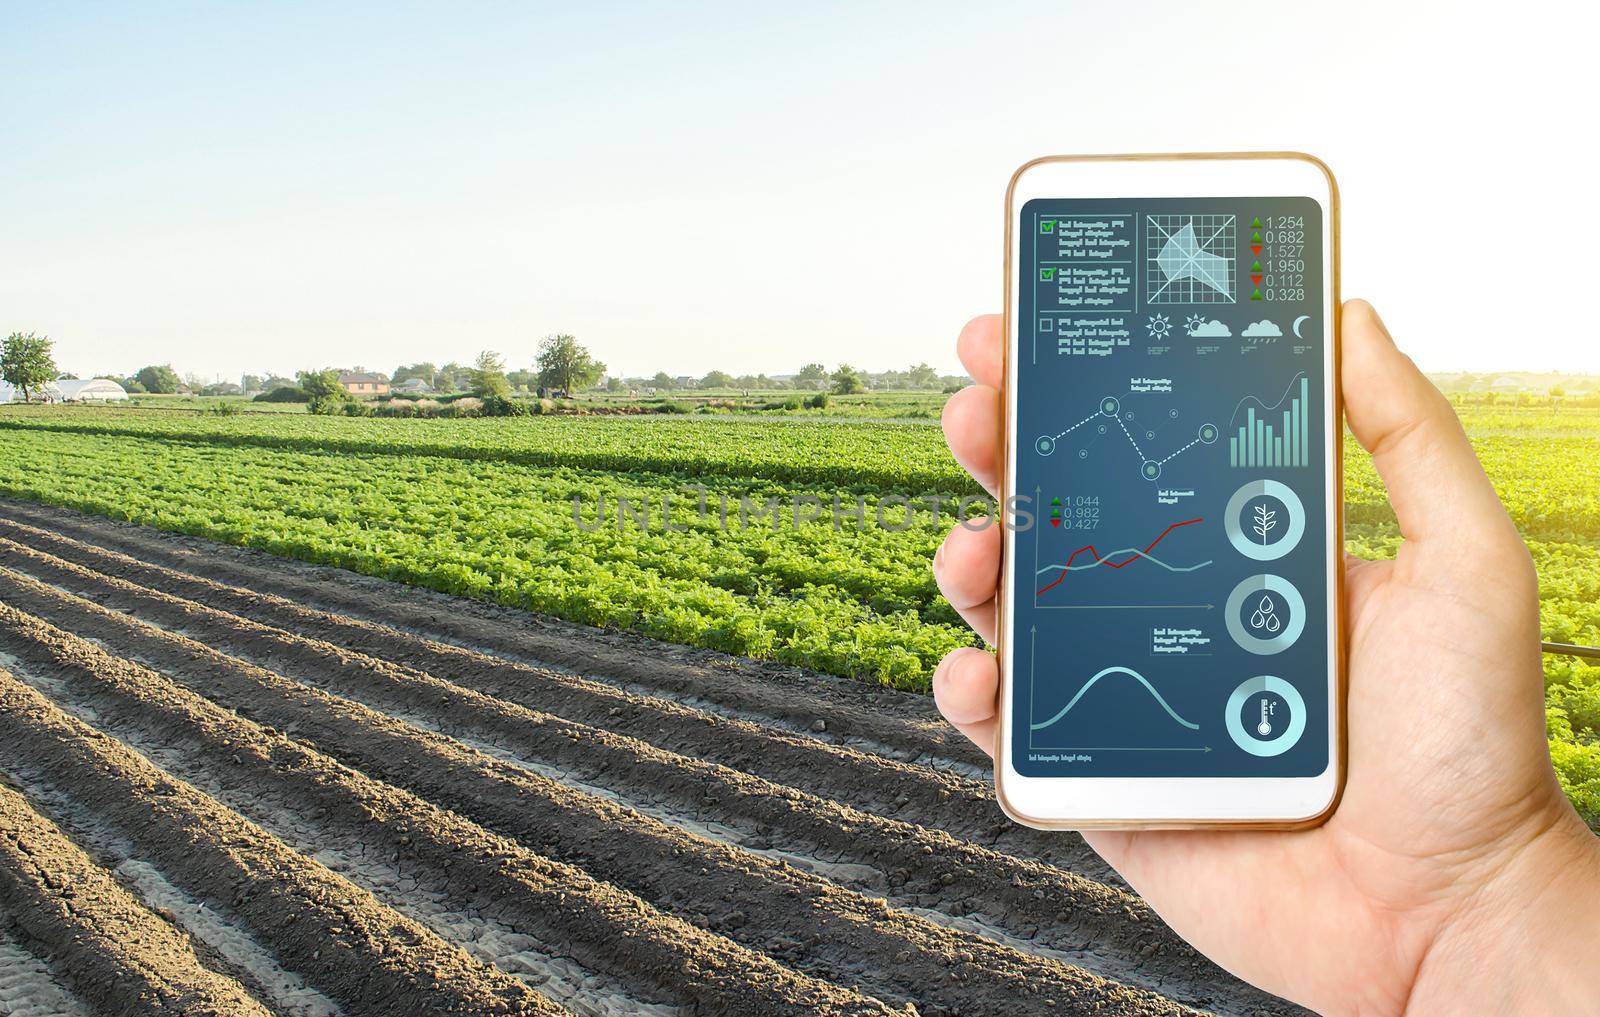 Hand with a phone on the background of a farm field. Quality control. Innovative modern technologies in agriculture. Collect data, forecasts to improve harvest quality. Internet of Things. Monitoring by iLixe48